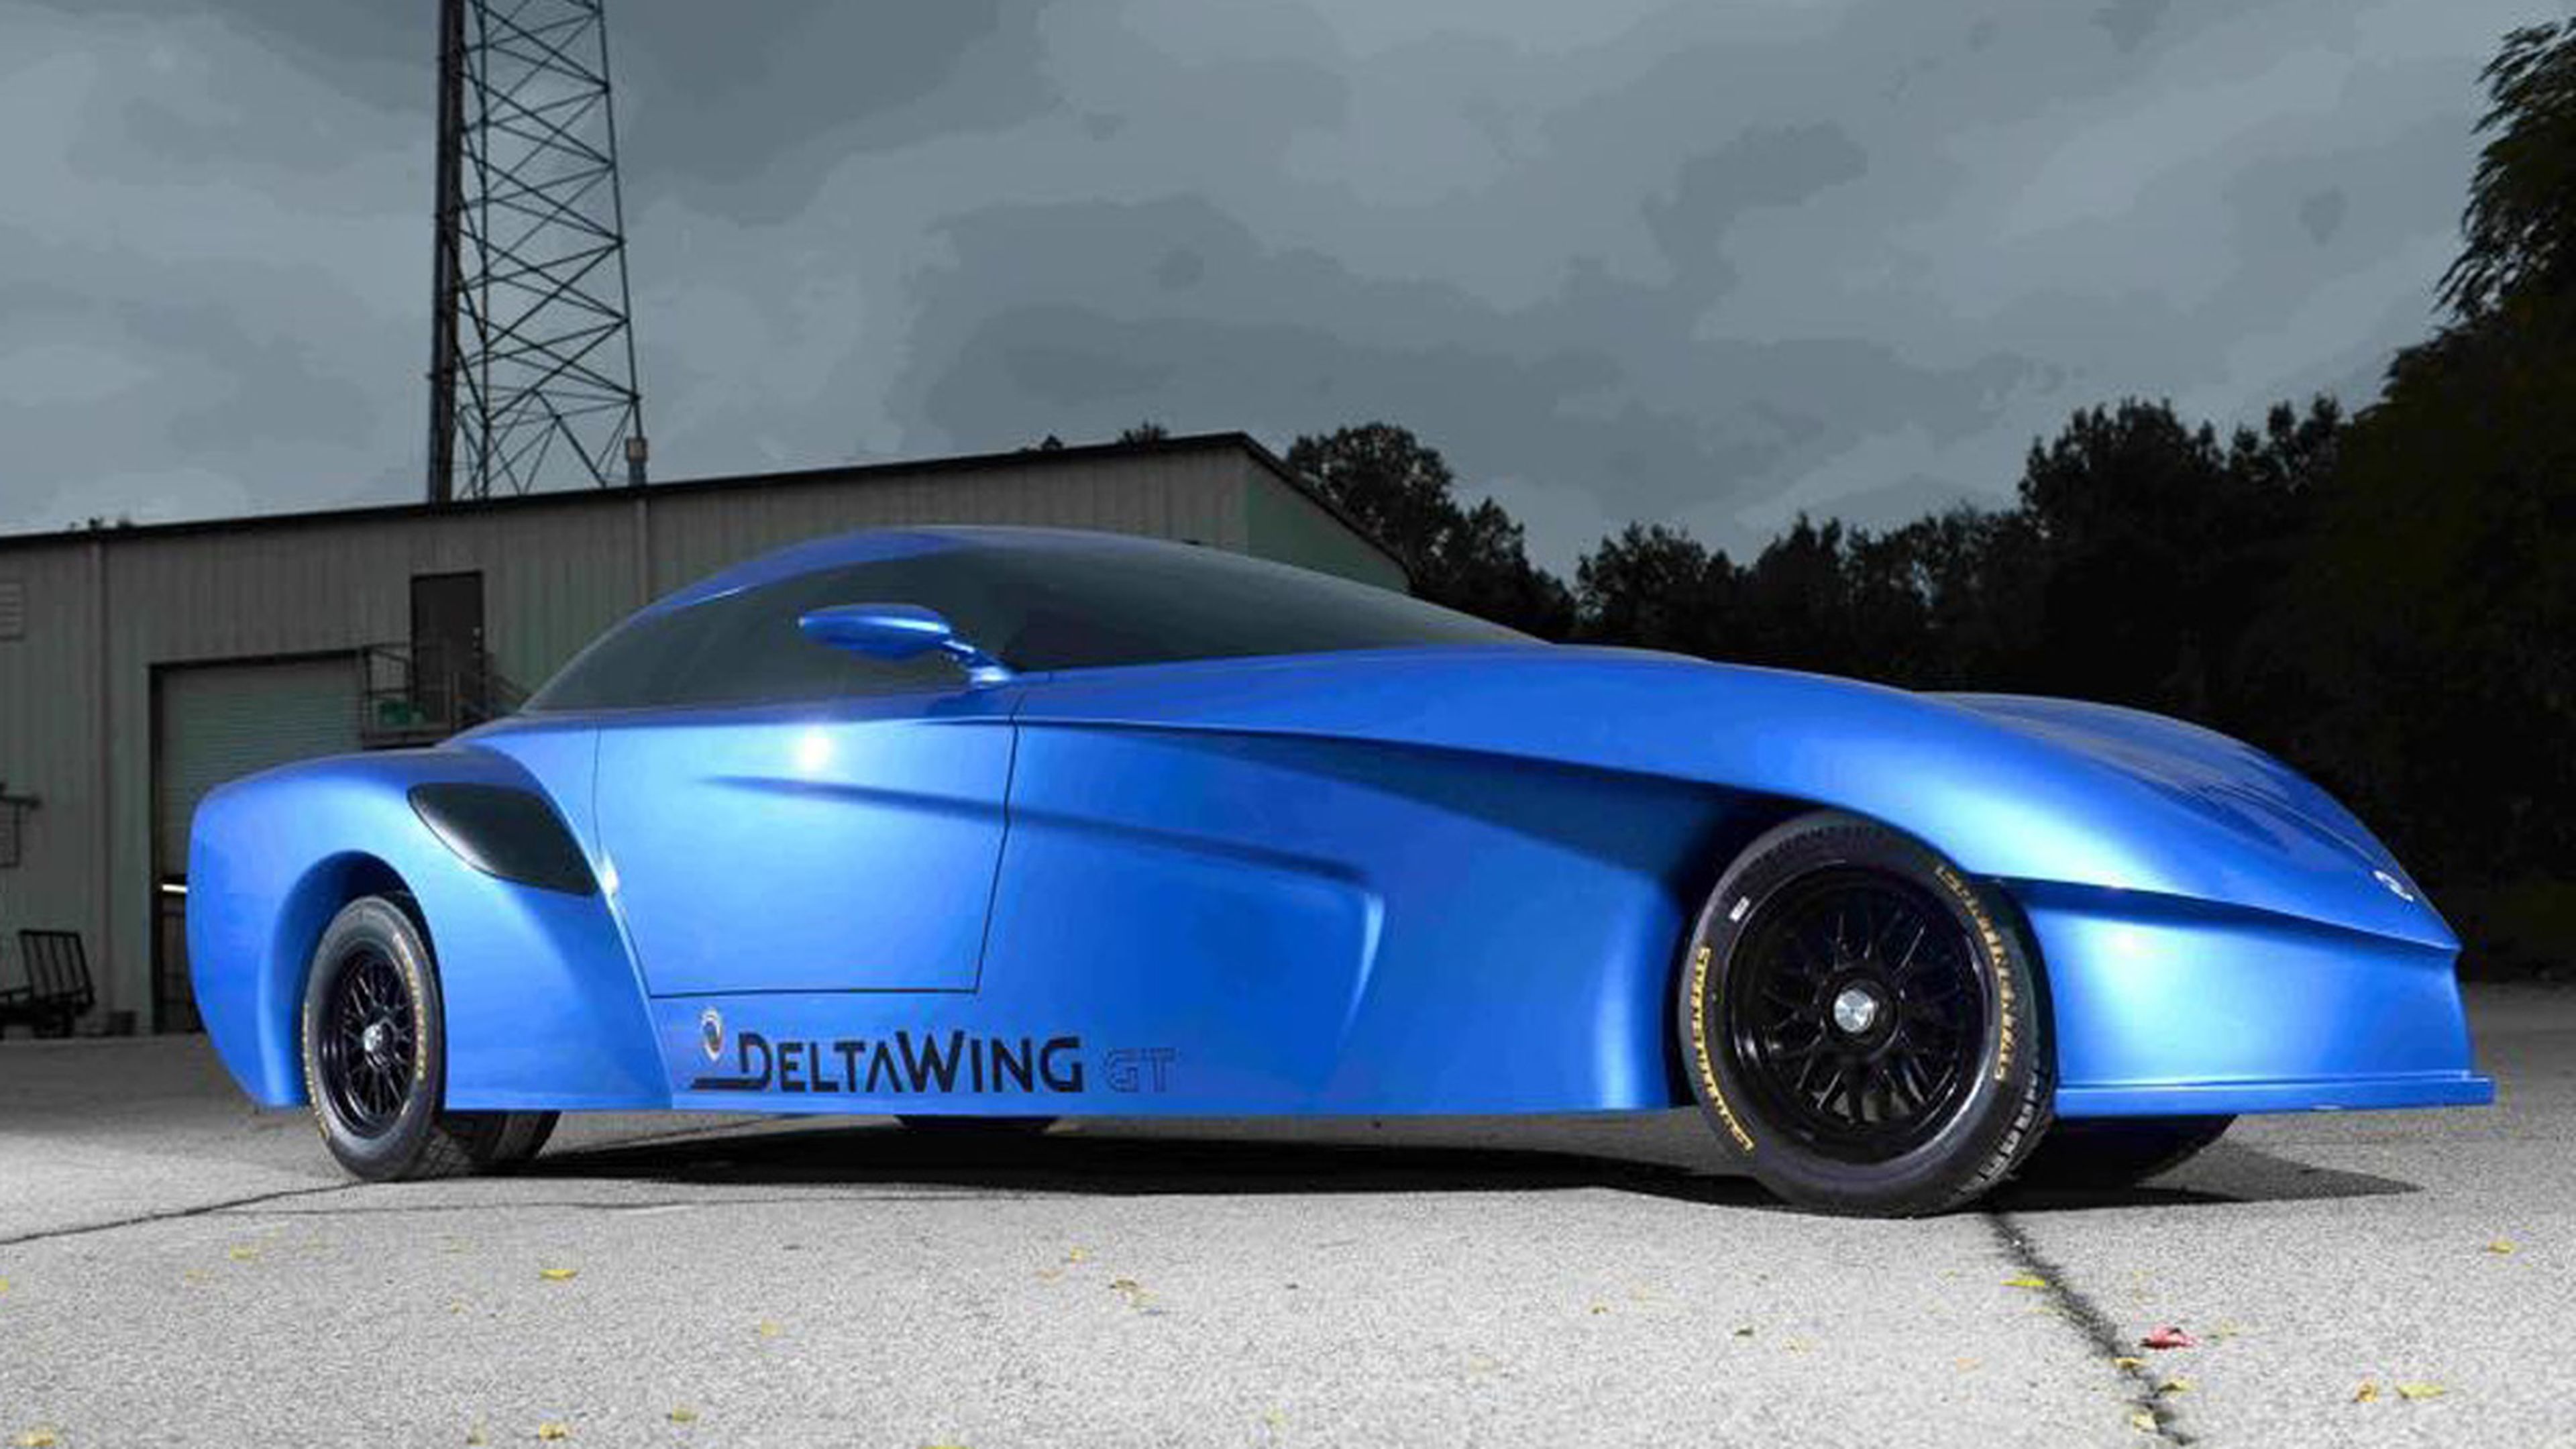 Panoz Deltawing calle